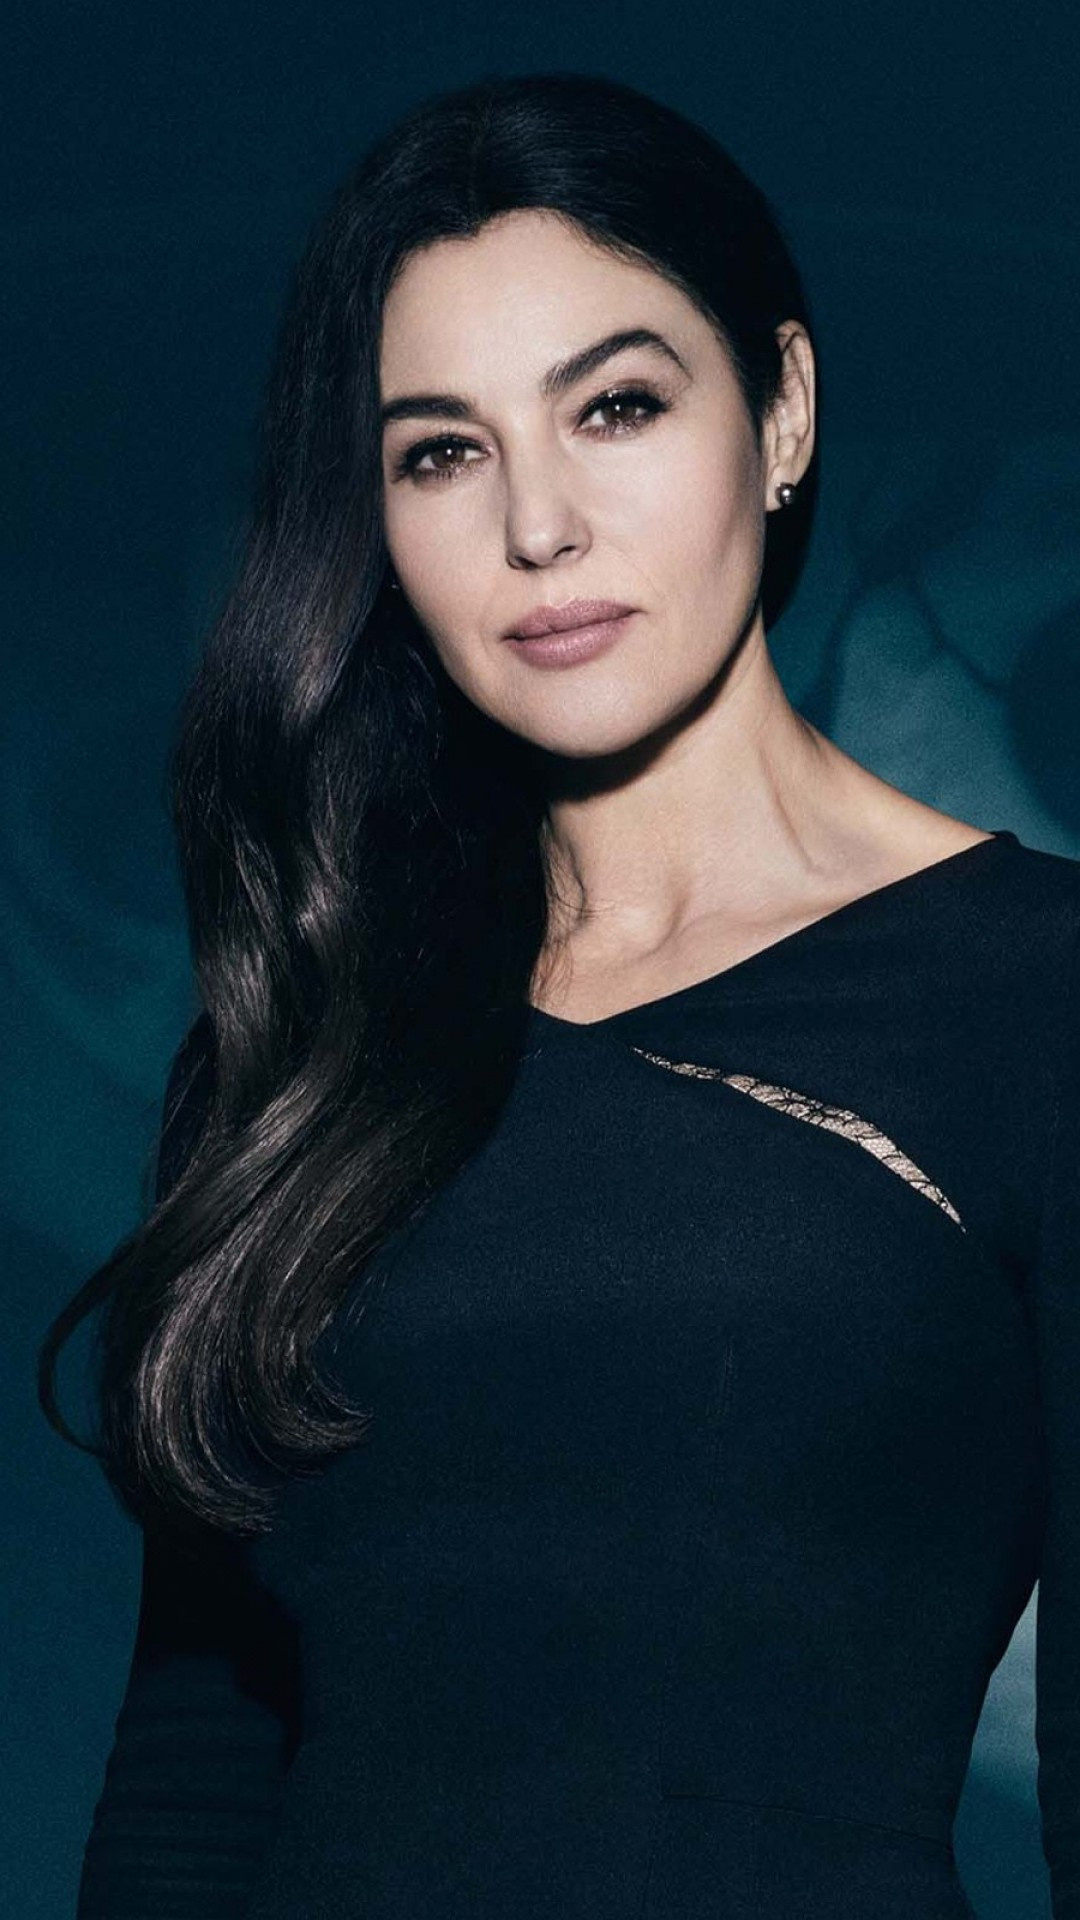 Monica Bellucci: Ranked fourth in Los Angeles Times Magazine's list of the 50 most beautiful women in film, 2011. 1080x1920 Full HD Background.